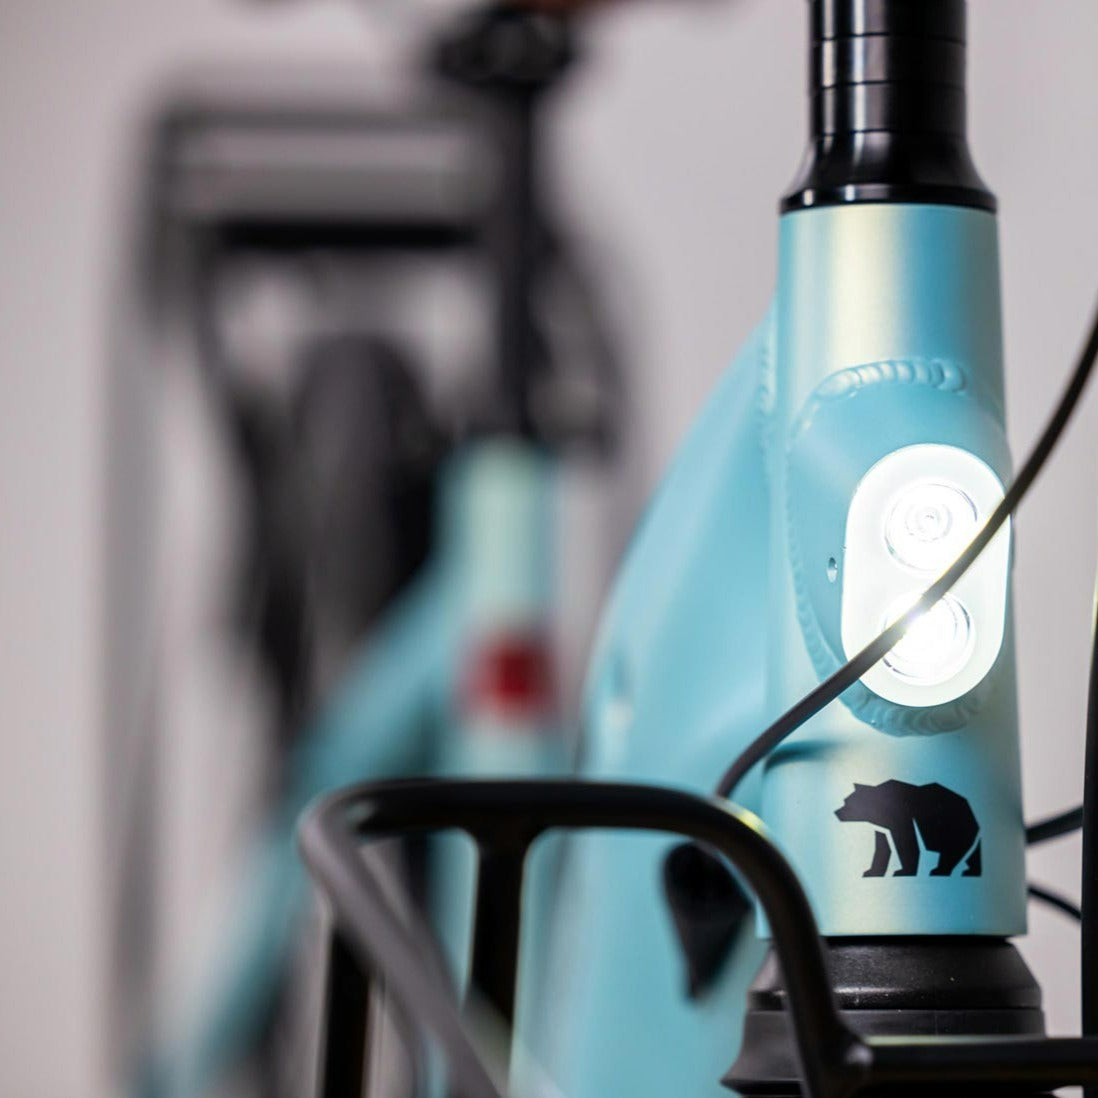 A close-up photo showing the detail of the integrated front light on the Glacier Blue frame of the Kuma S2 electric bike.